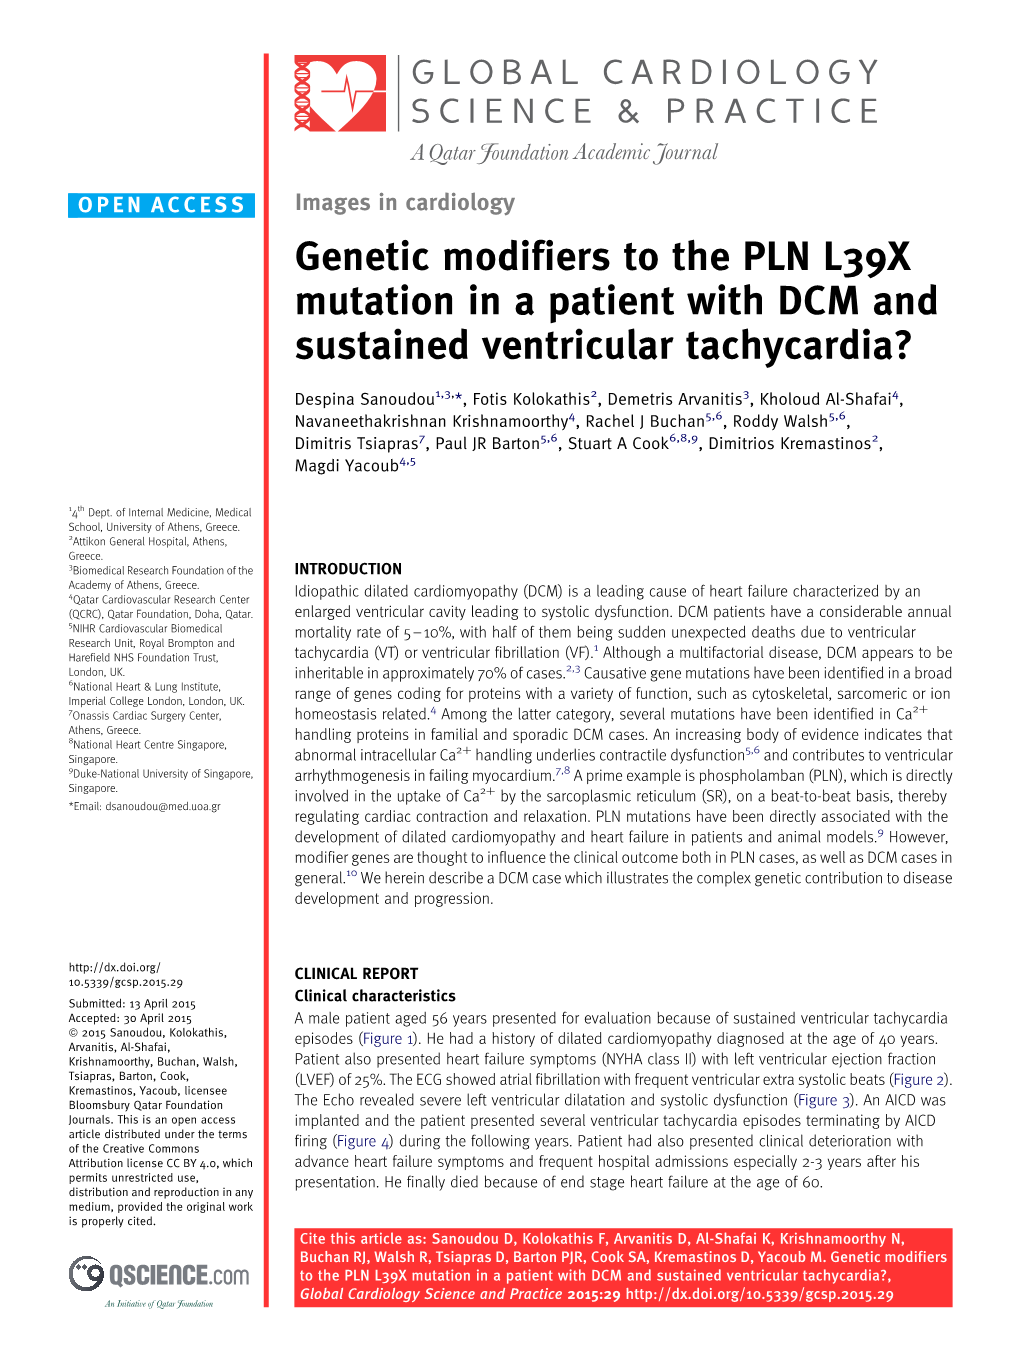 Genetic Modifiers to the PLN L39X Mutation in a Patient with DCM and Sustained Ventricular Tachycardia?